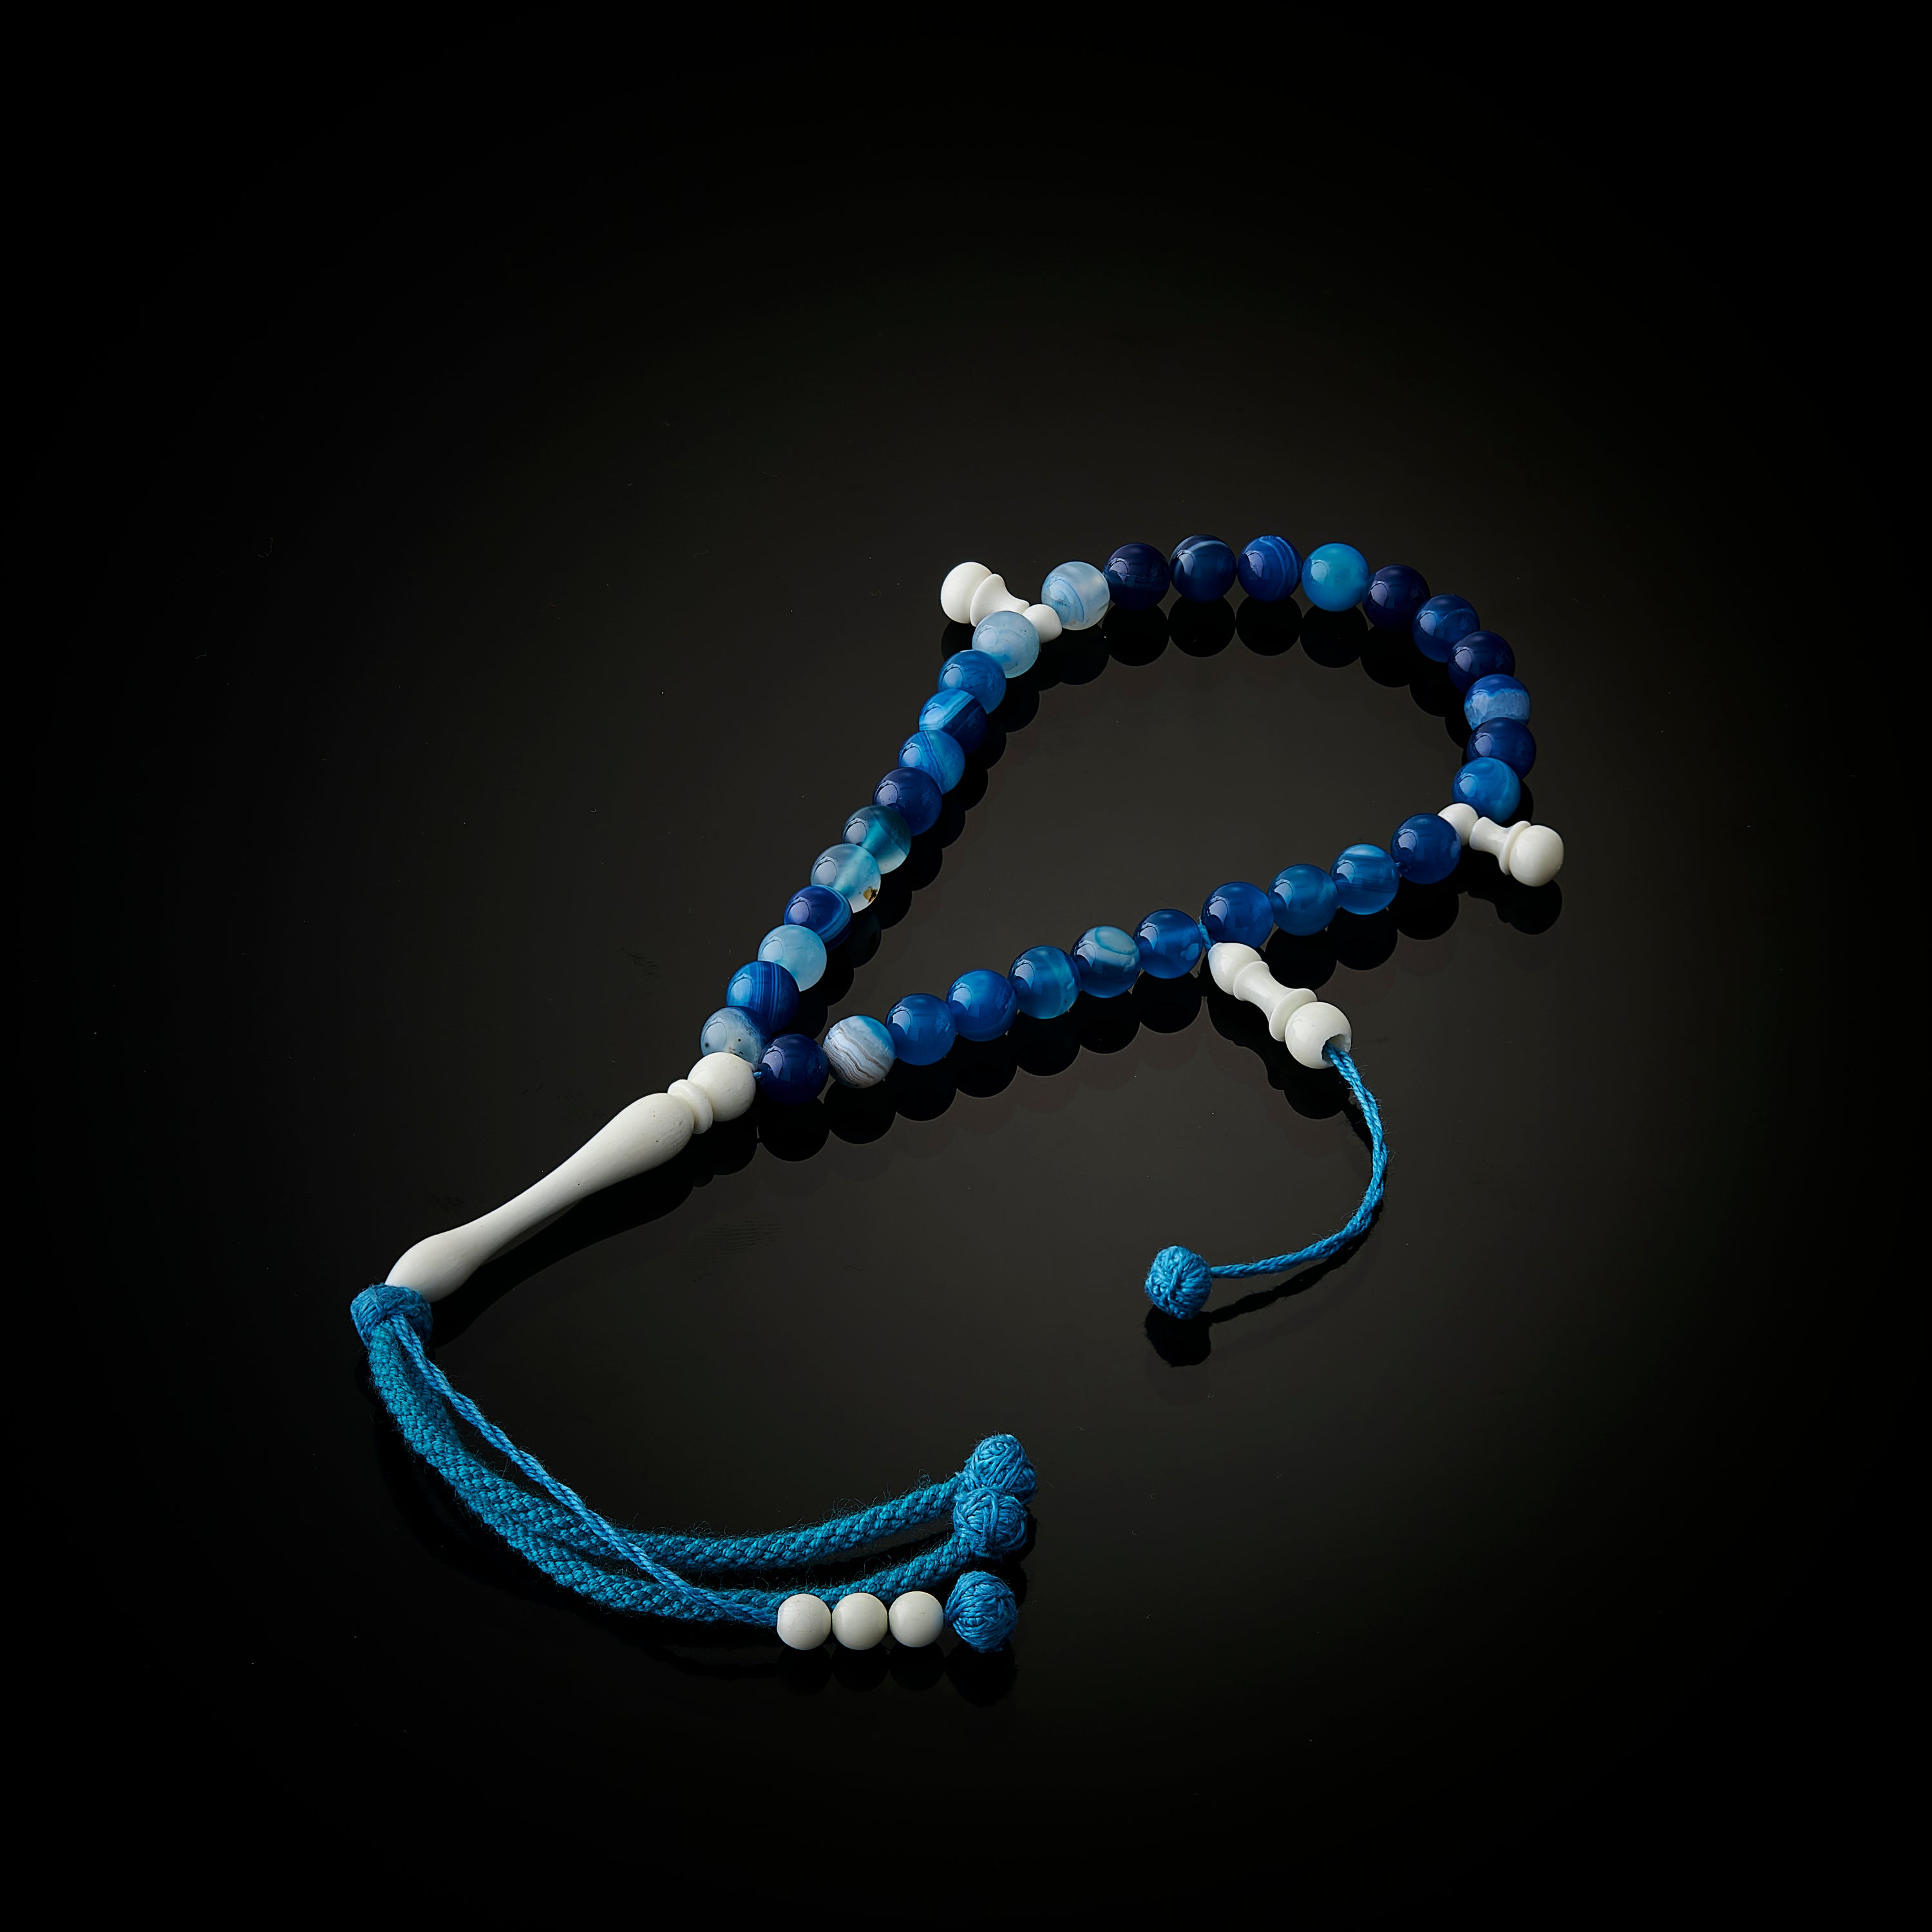 The Young Seeker's Misbaha: Blue Aqeeq - 33 Beads, 8mm